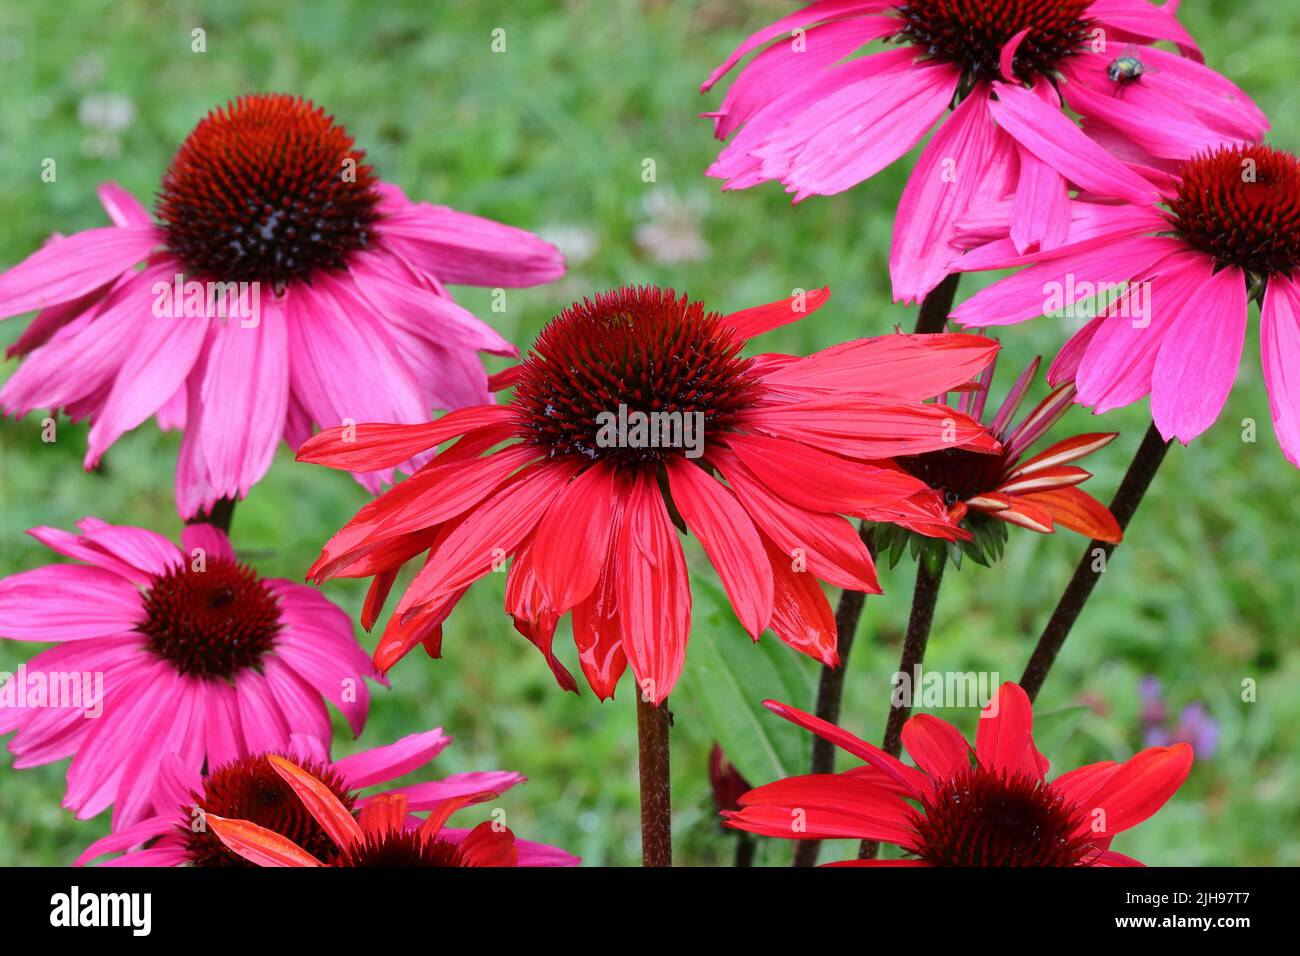 close-up of wet pink and red echinacea purpurea flowers after a rain shower, selective focus Stock Photo